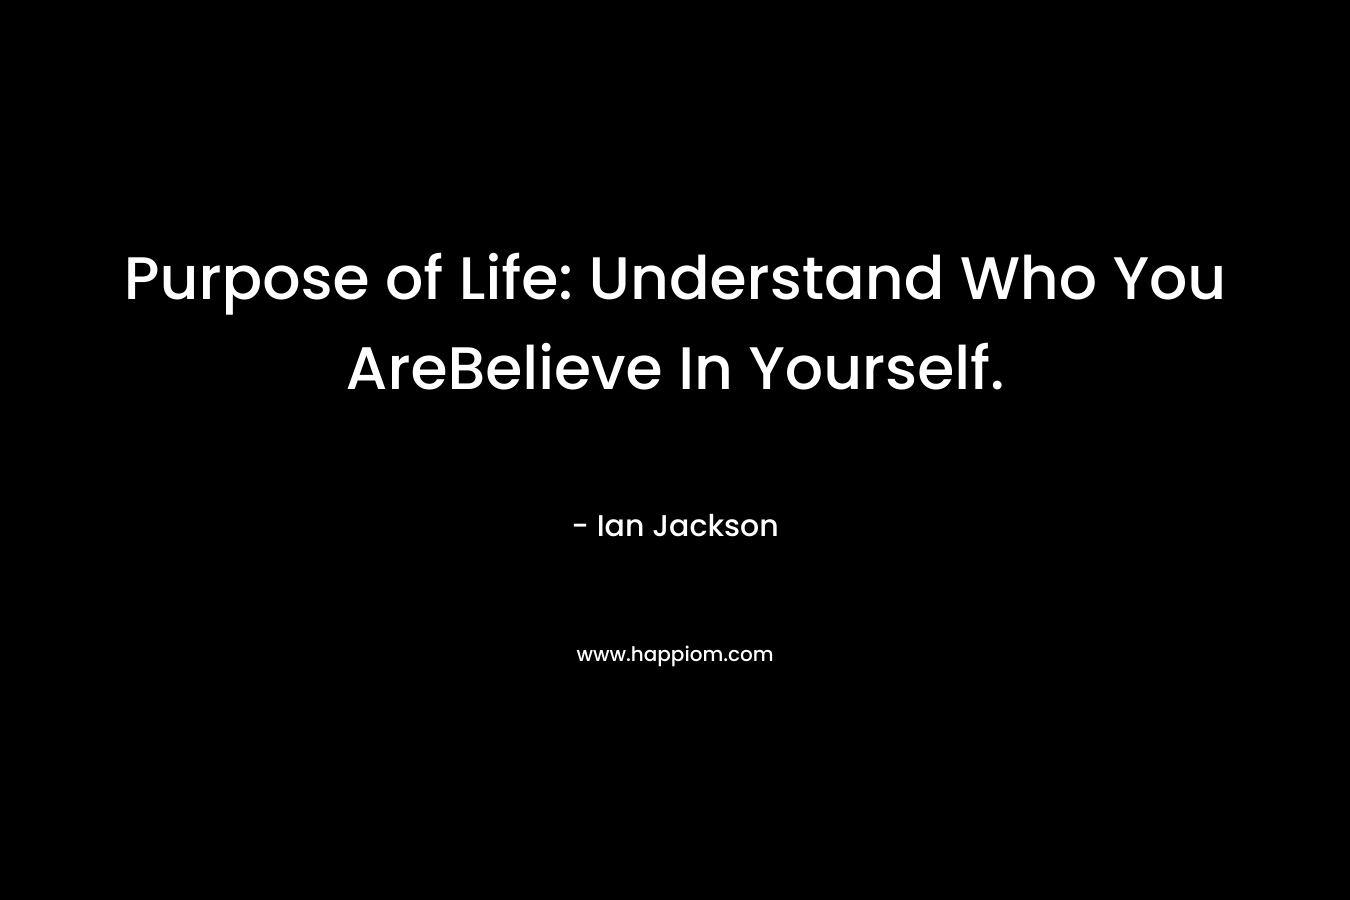 Purpose of Life: Understand Who You AreBelieve In Yourself.